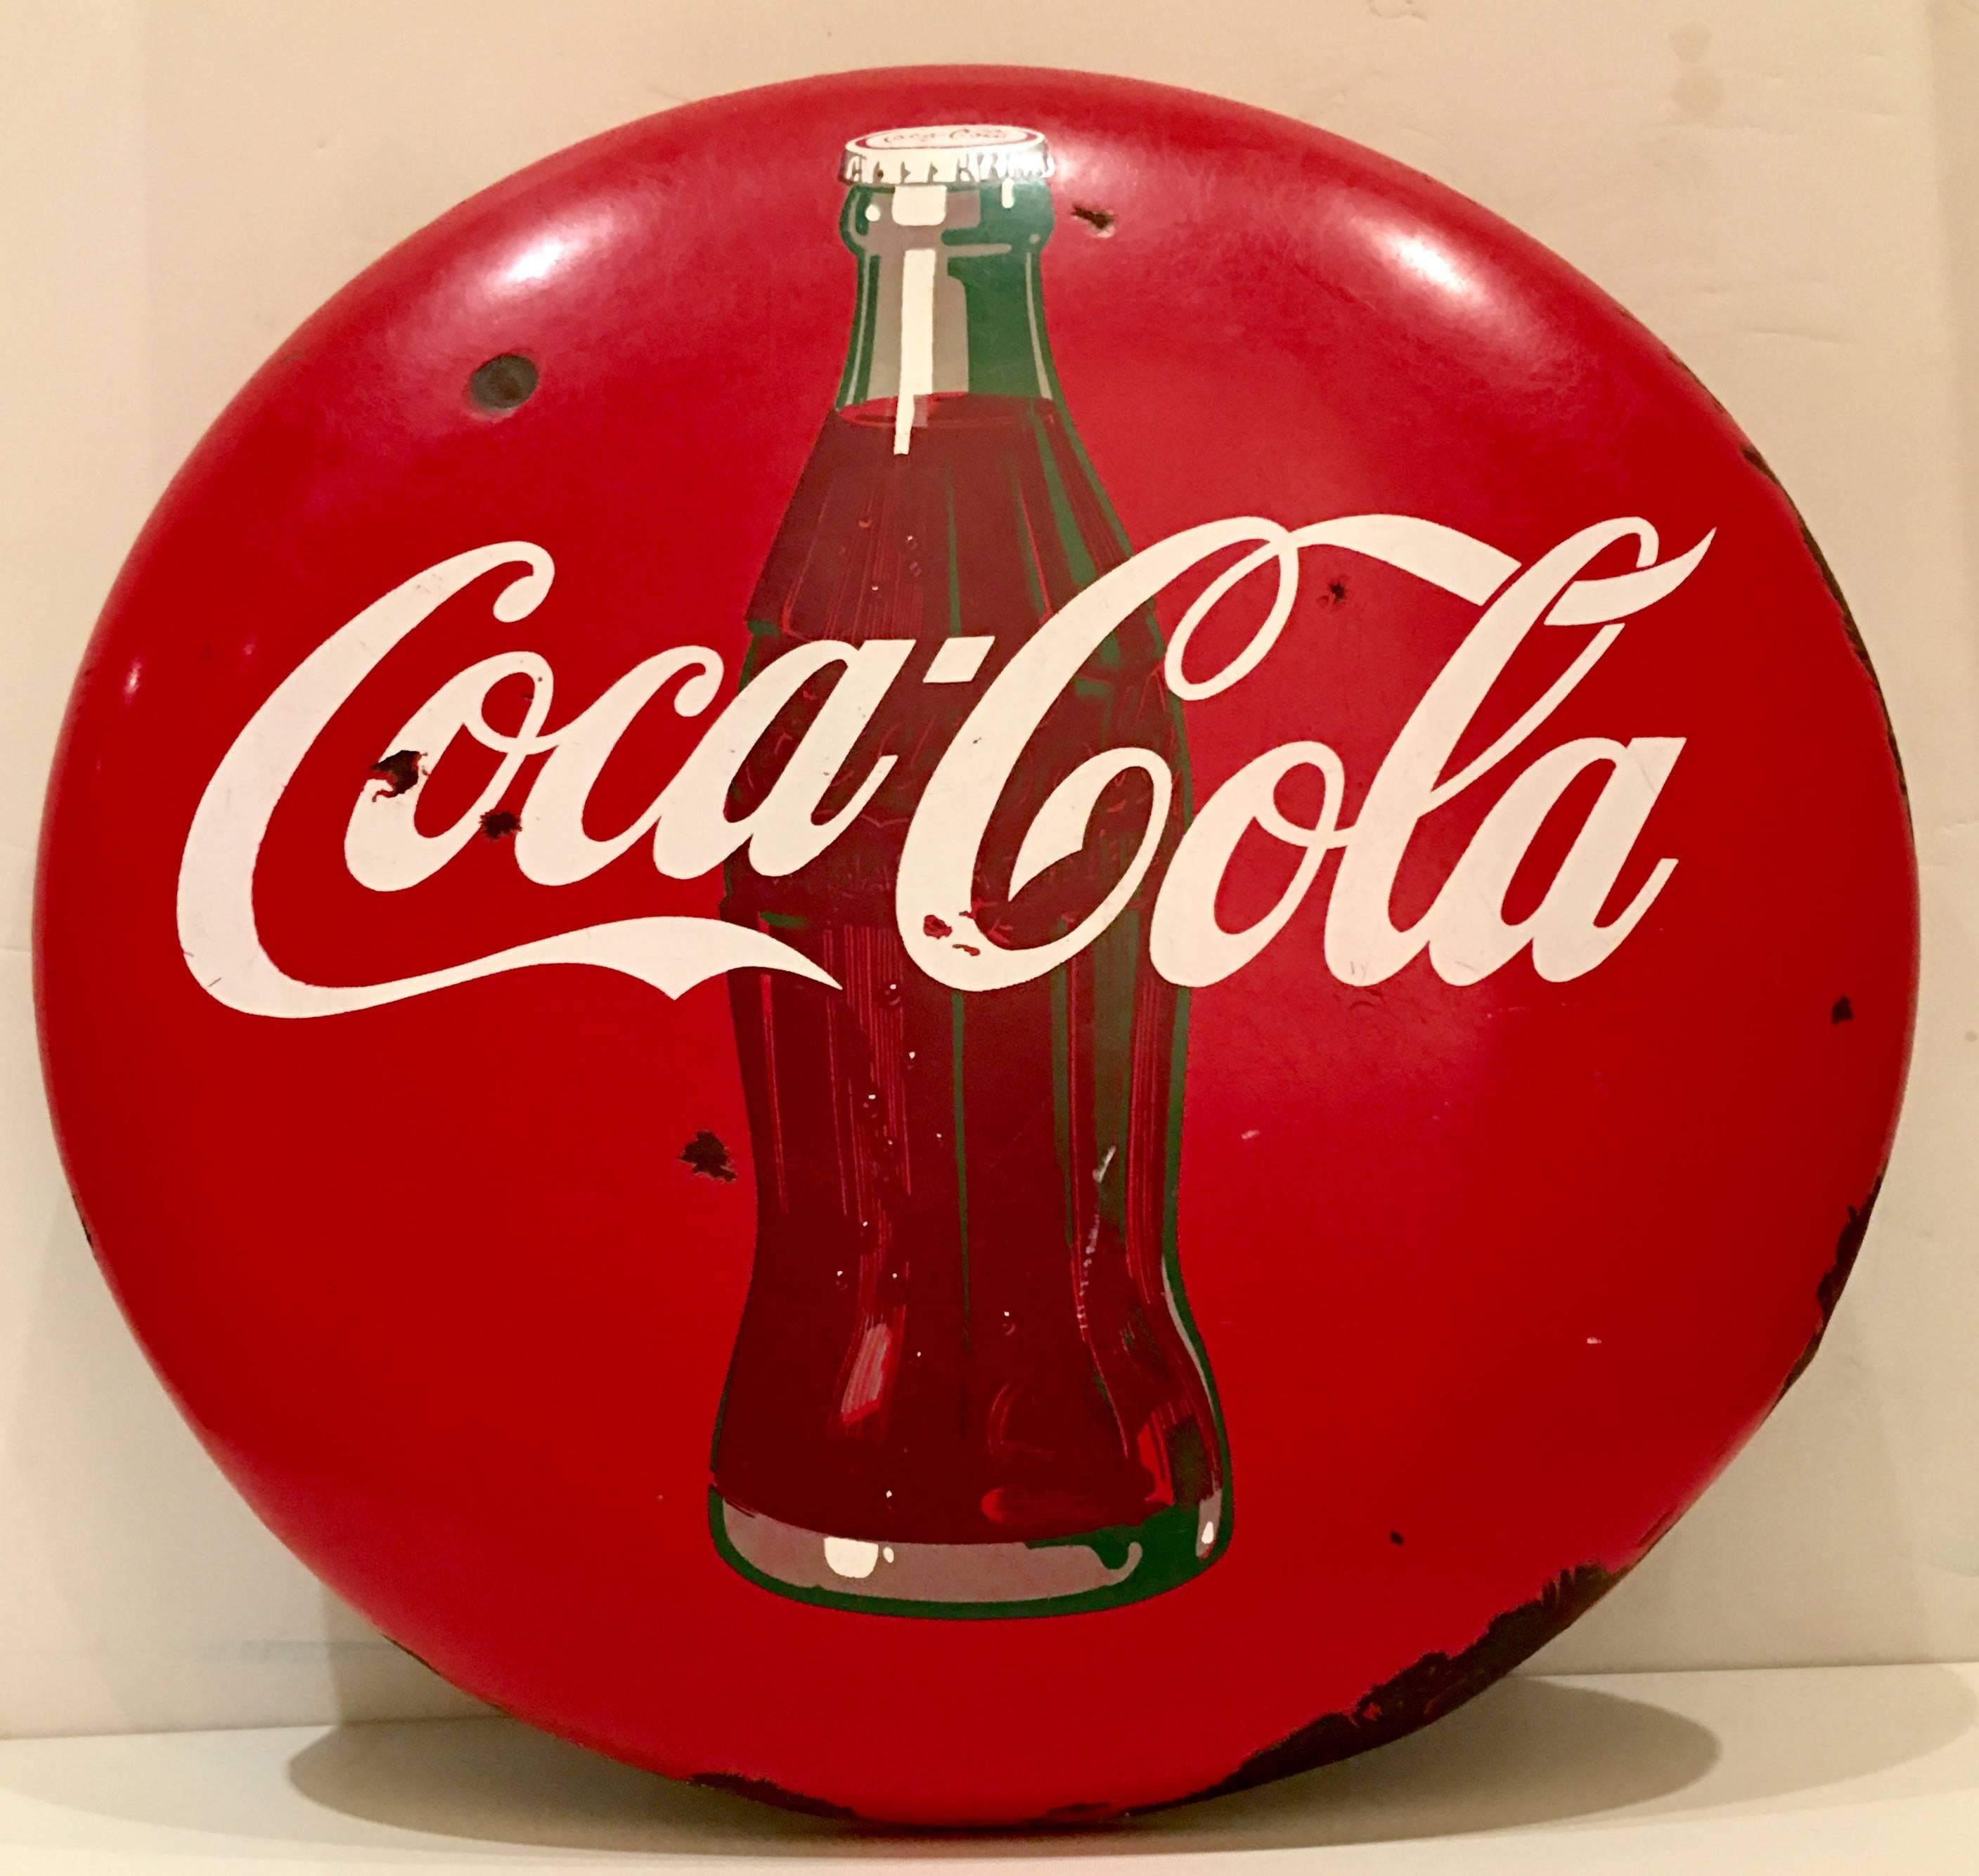 Iconic 1950s Coca-Cola porcelain advertising "button" sign. This 24" inch diameter sign depicts the iconic Coca Cola bottle.
Ready to install with existing metal wire.